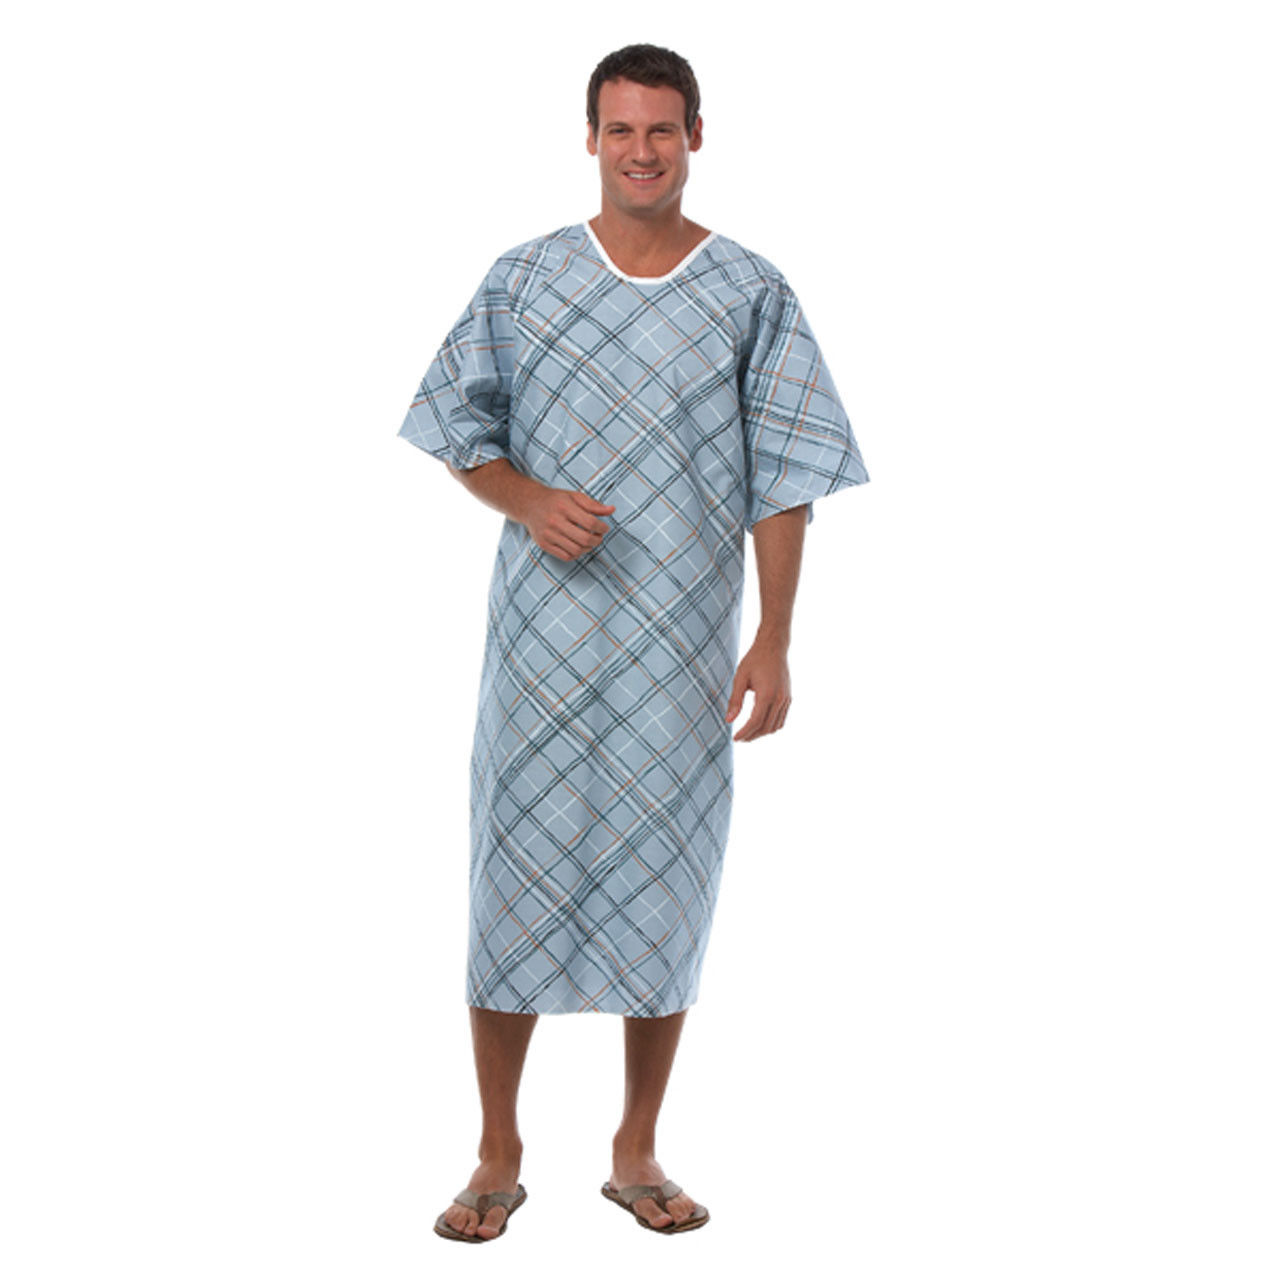 Is the blue hospital gown available for bulk purchase?